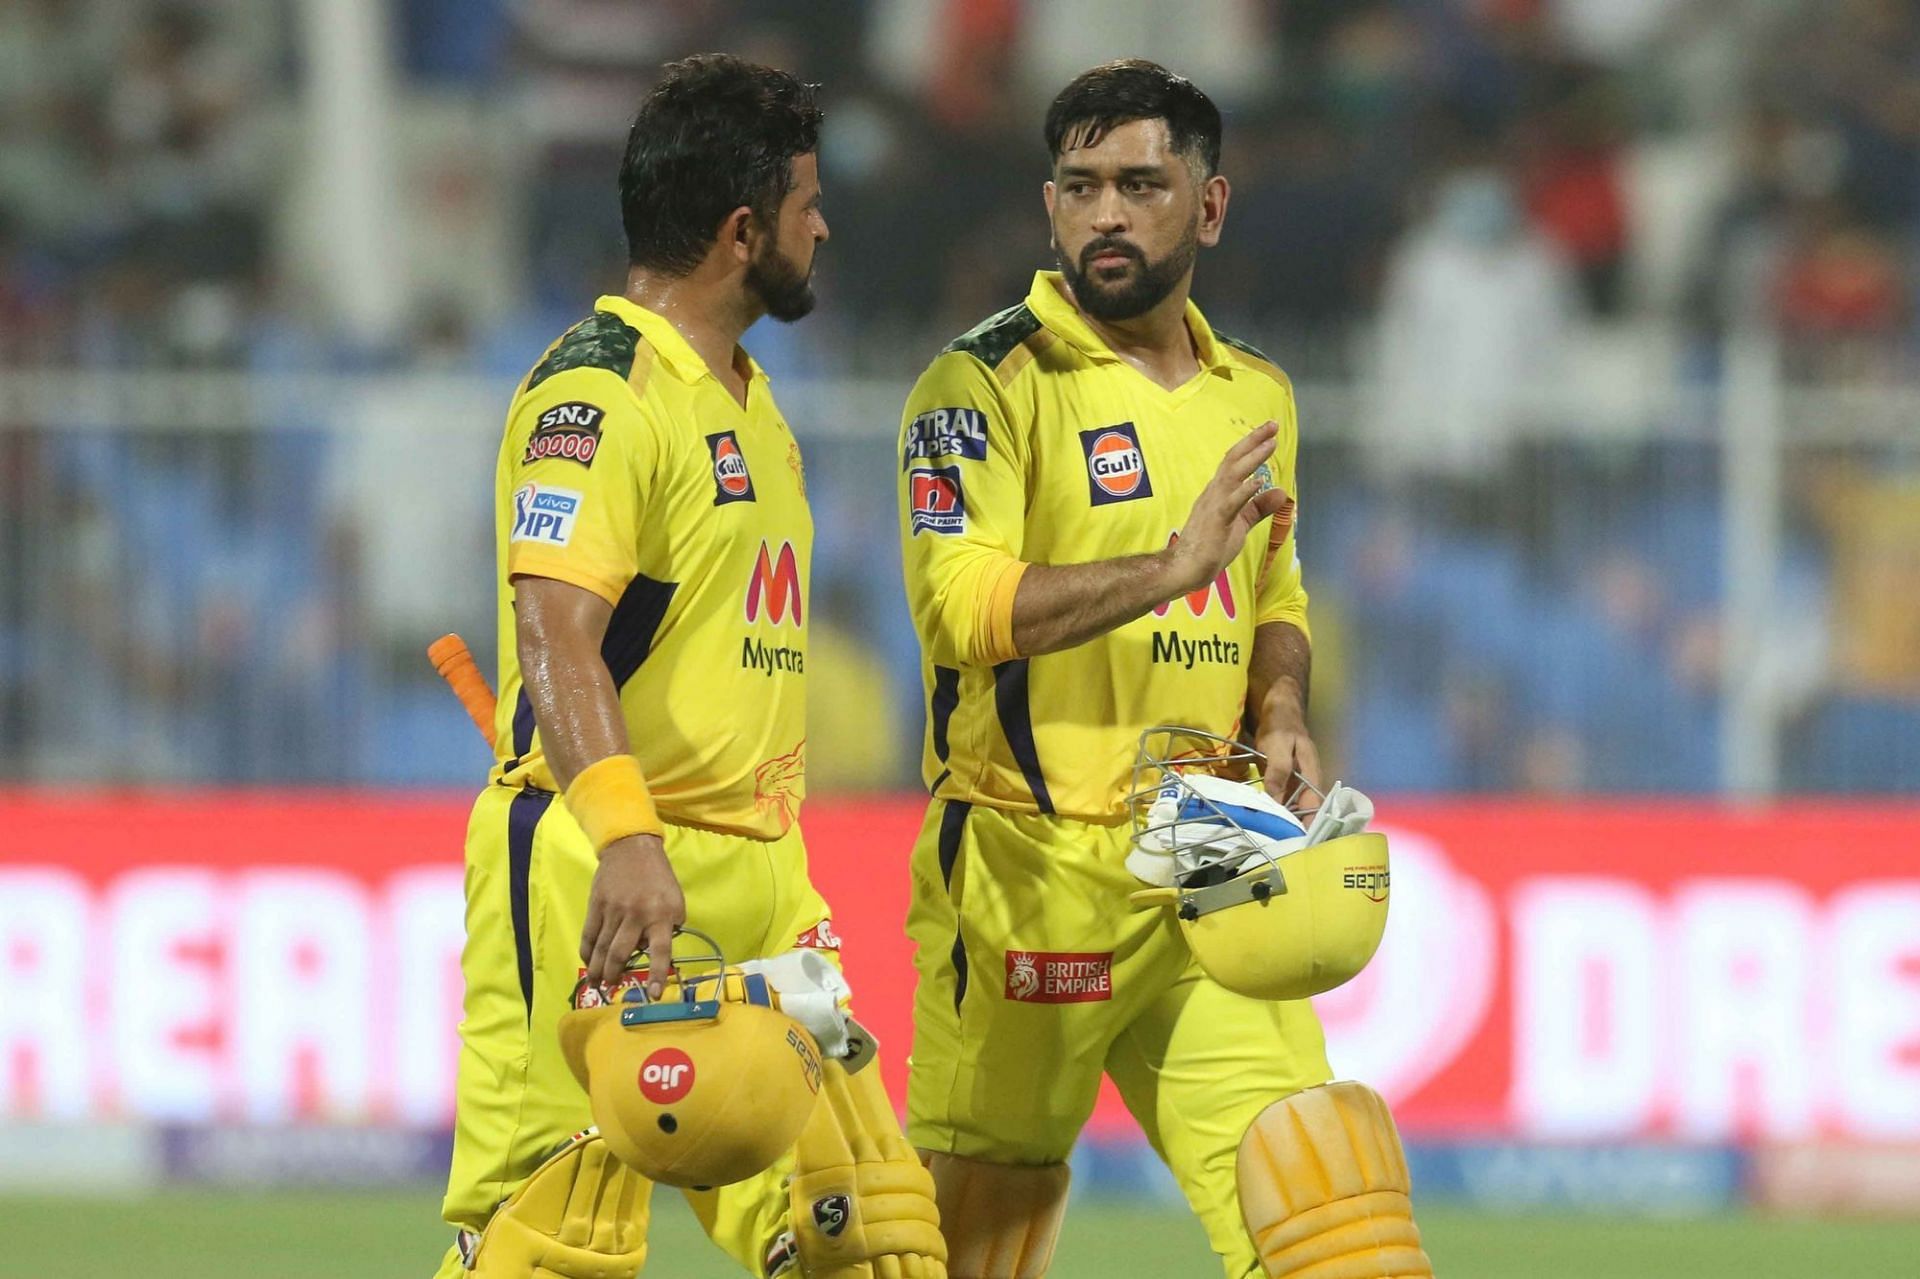 Could this be the last time we see Suresh Raina(left) and MS Dhoni(right) in action for CSK? (Image Courtesy: IPLT20.com)